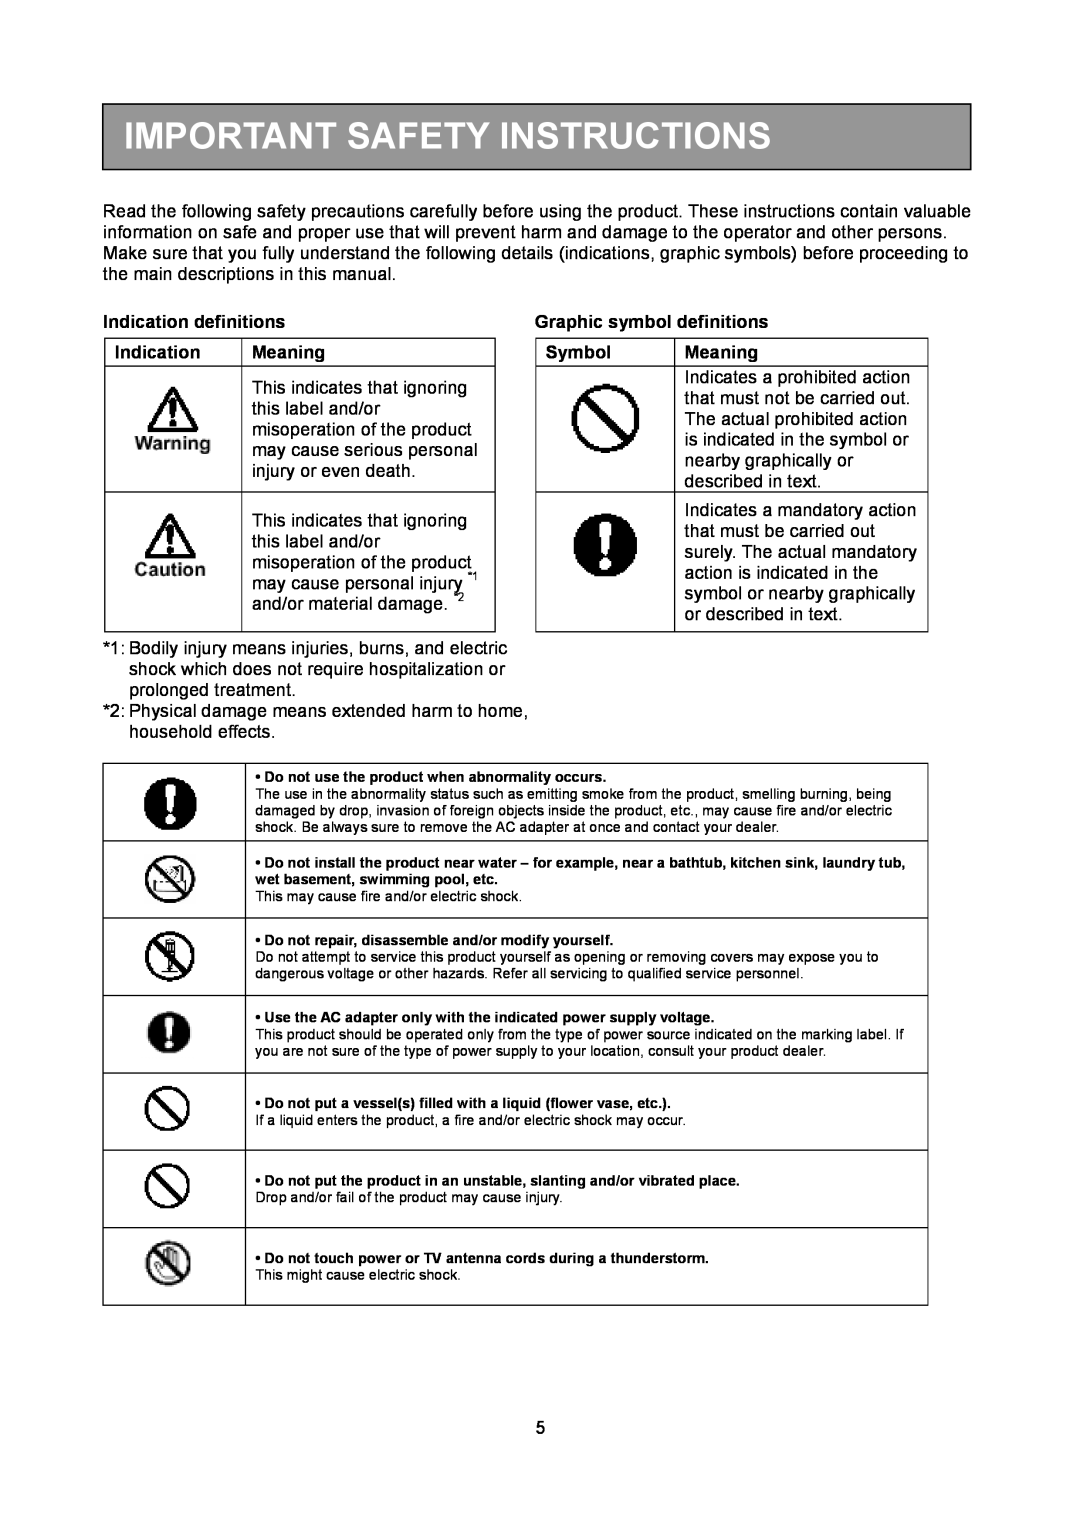 Toshiba KV-HD01A manual Important Safety Instructions, Do not use the product when abnormality occurs 